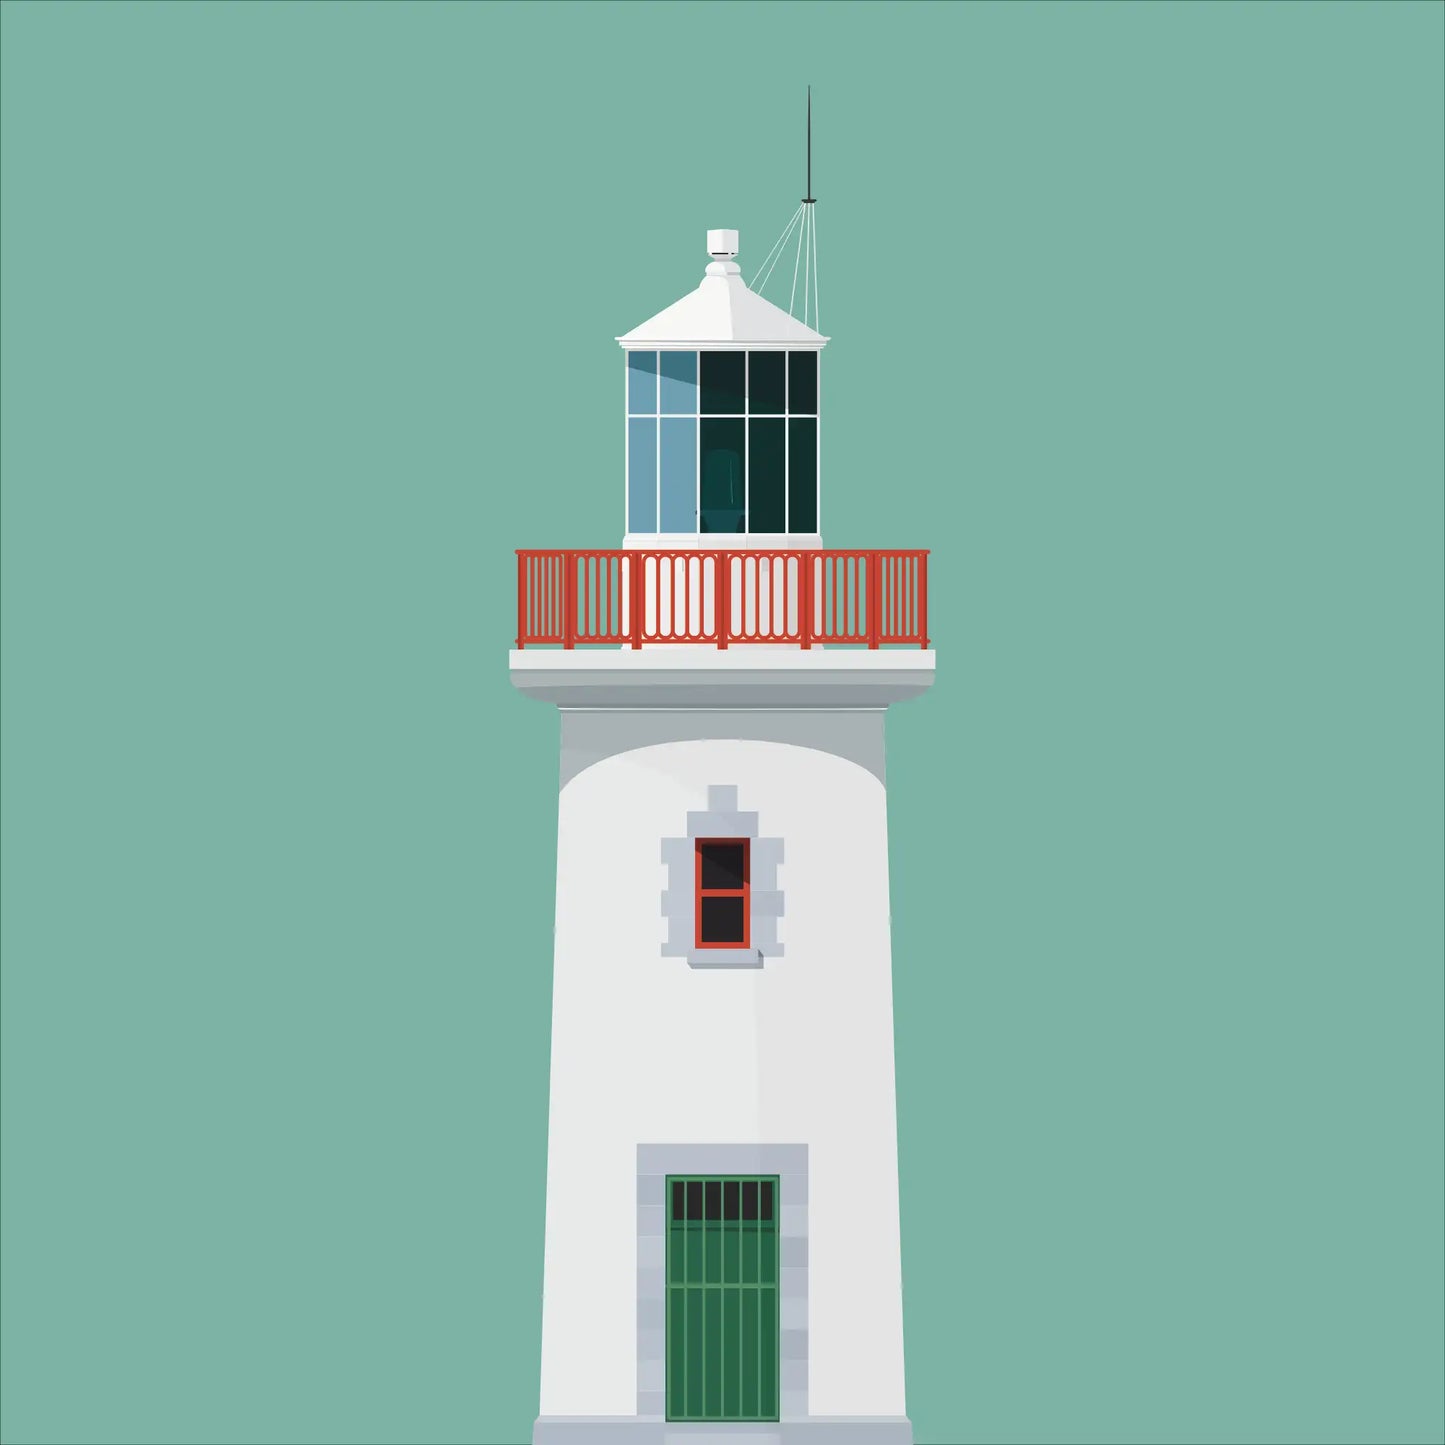 Contemporary graphic illustration of Scattery Island lighthouse on a white background inside light blue square.